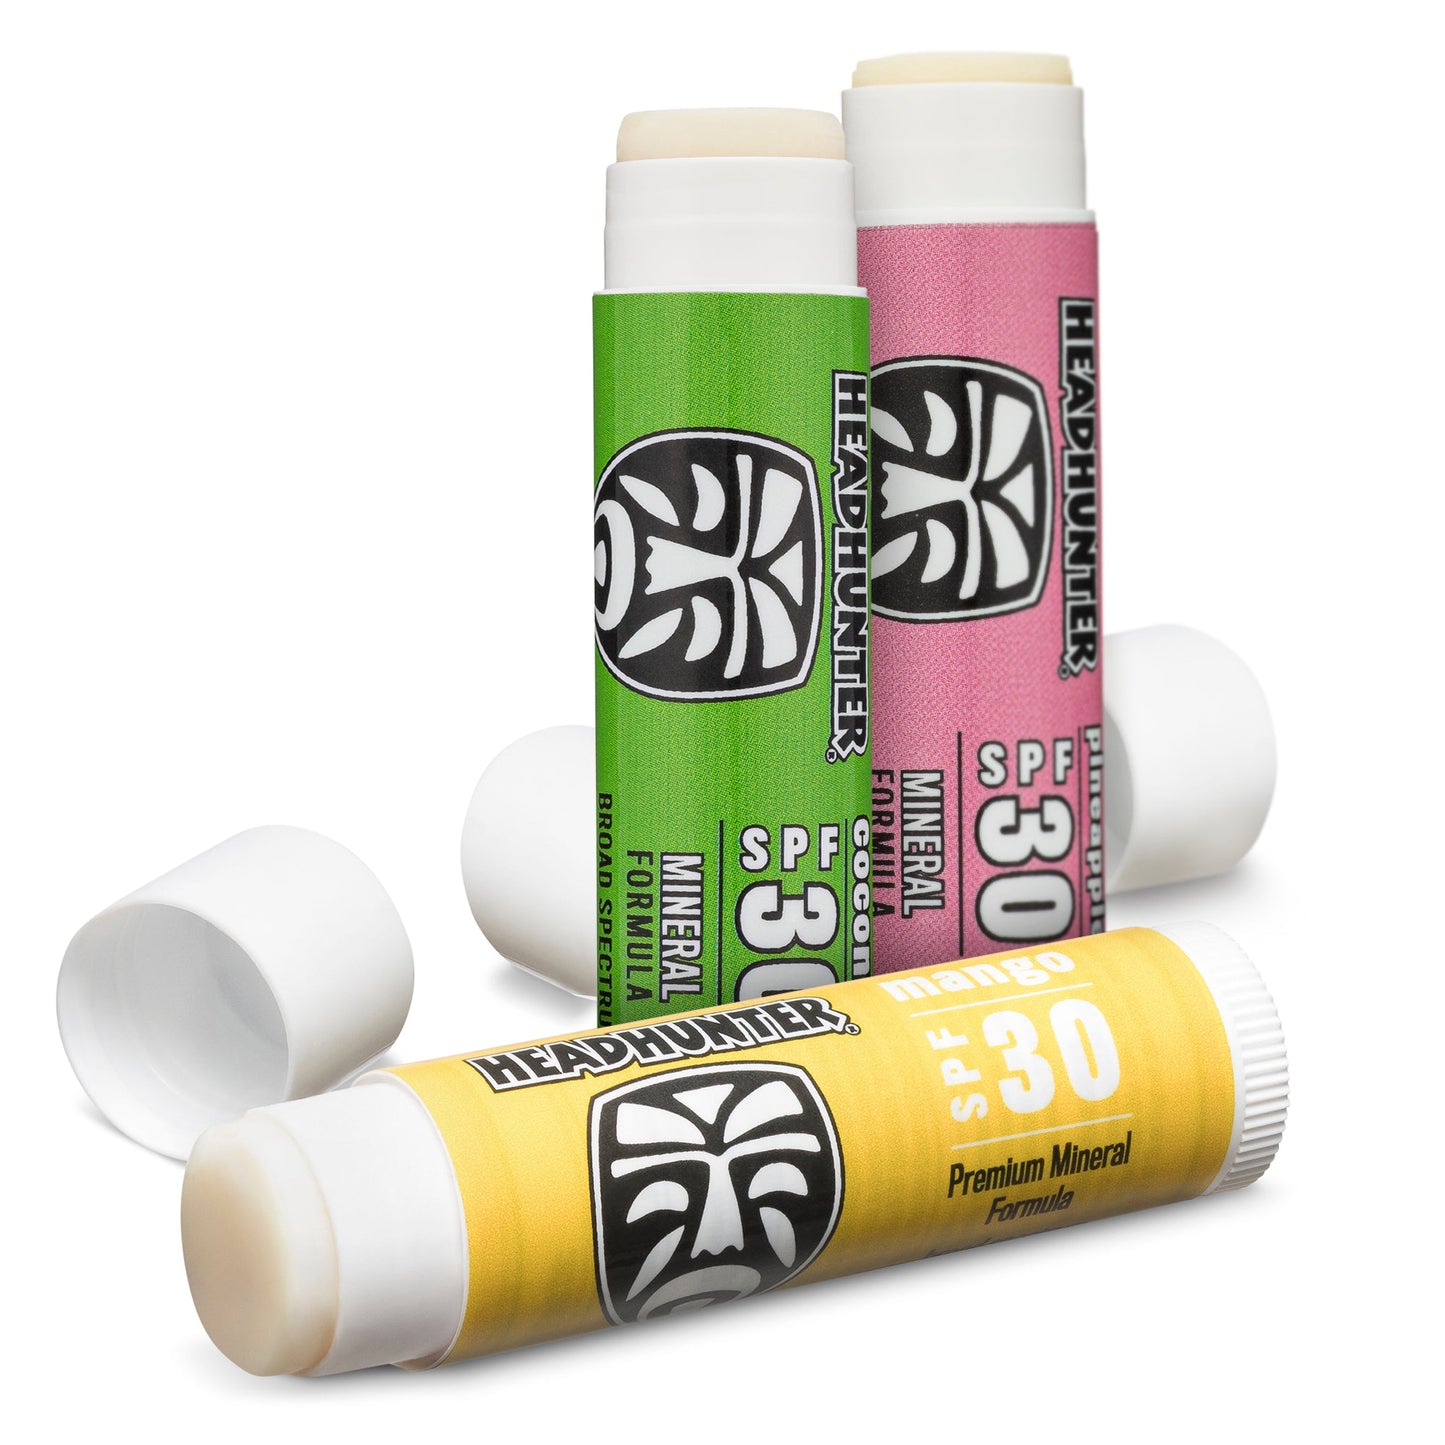 Lip Balm - SPF 30, Assorted Flavors - 6 Pack